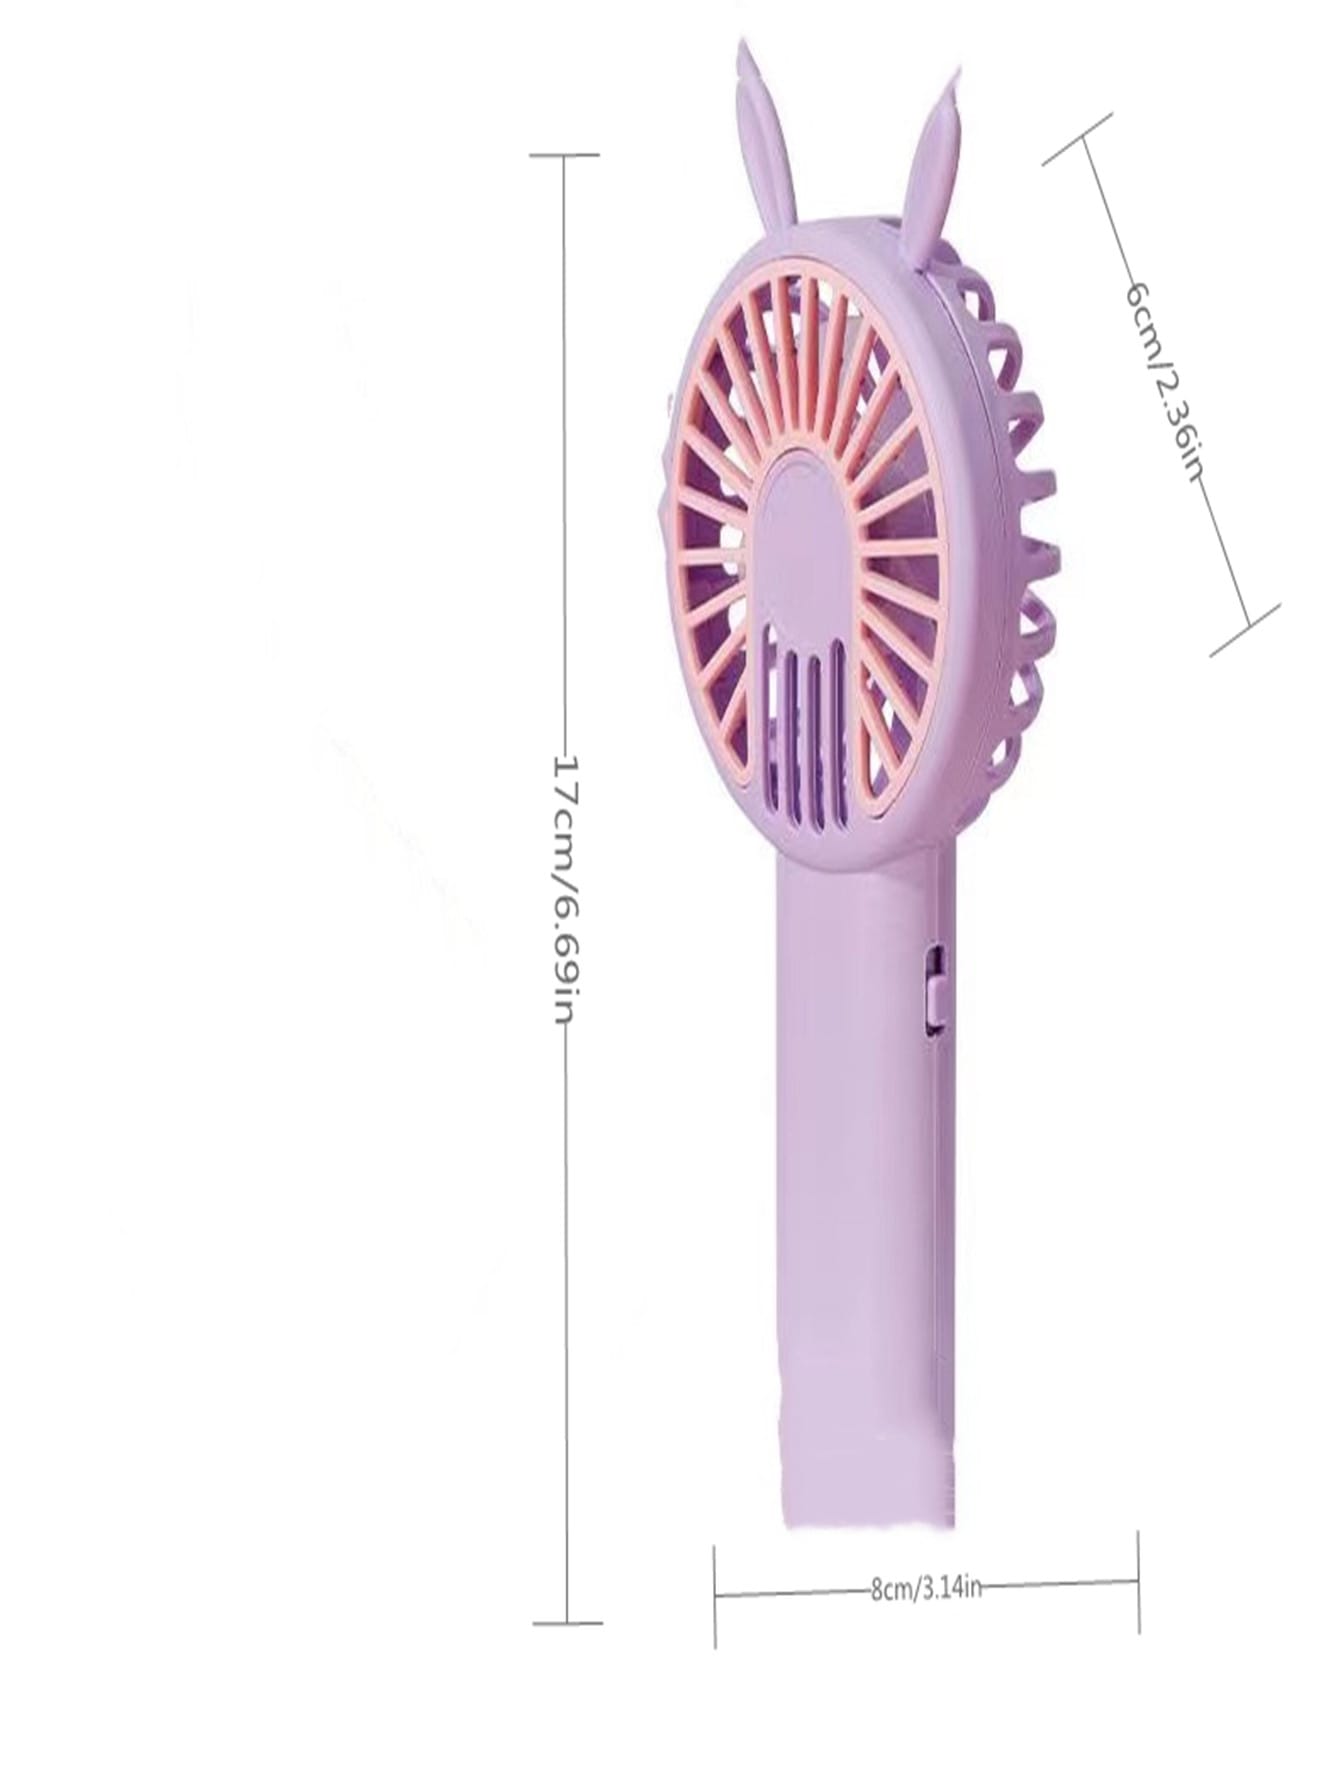 Portable Handheld Electric Fan With High Wind Power For Carrying, Recharging, Camping, Manual Operation, Low Noise-Purple-3